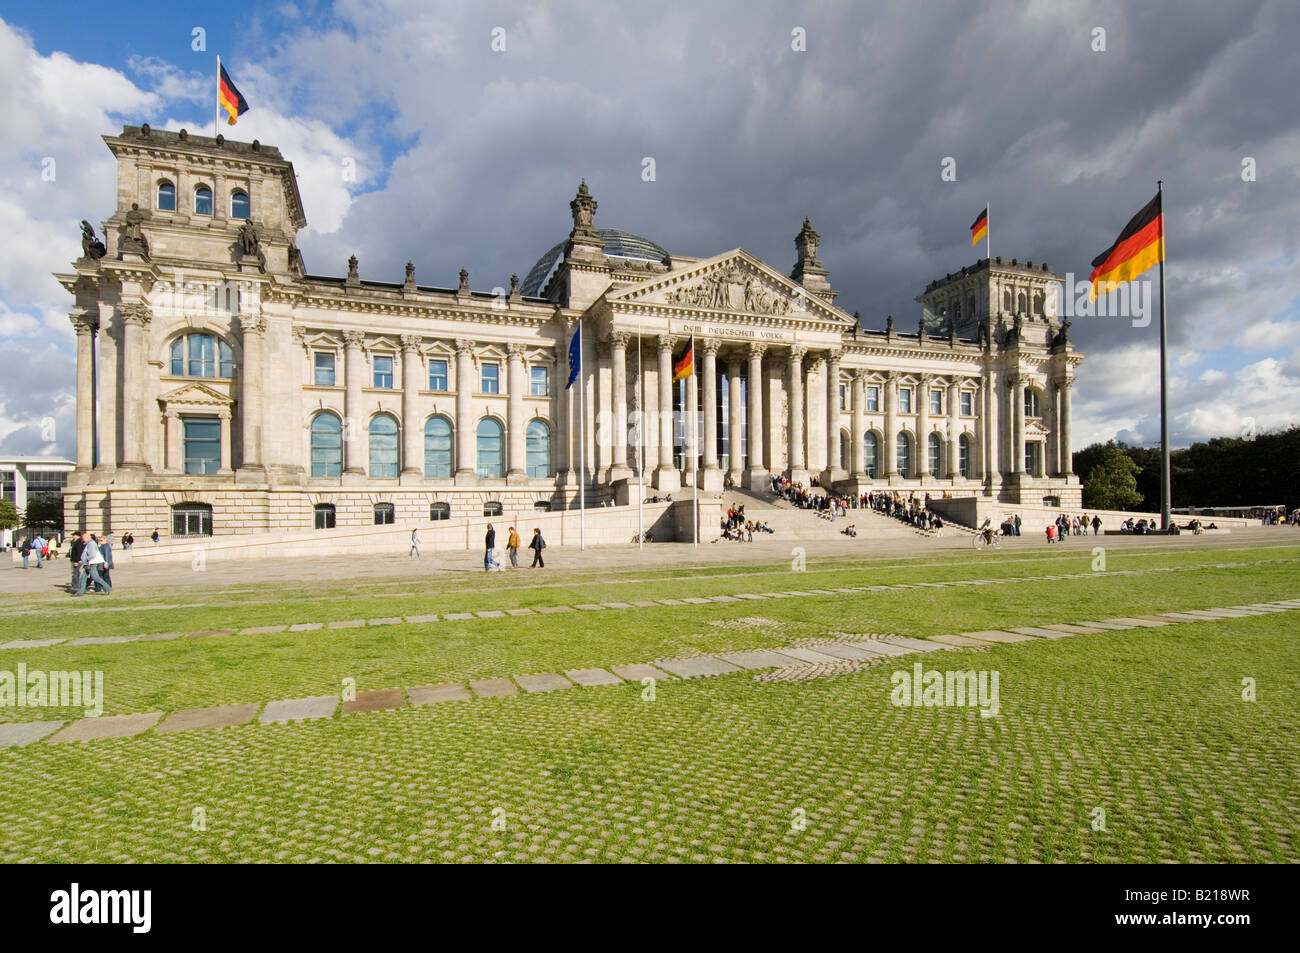 A wide angle view of the Reichstag (German Parliment Building) and tourists on a sunny day with dark clouds behind. Stock Photo